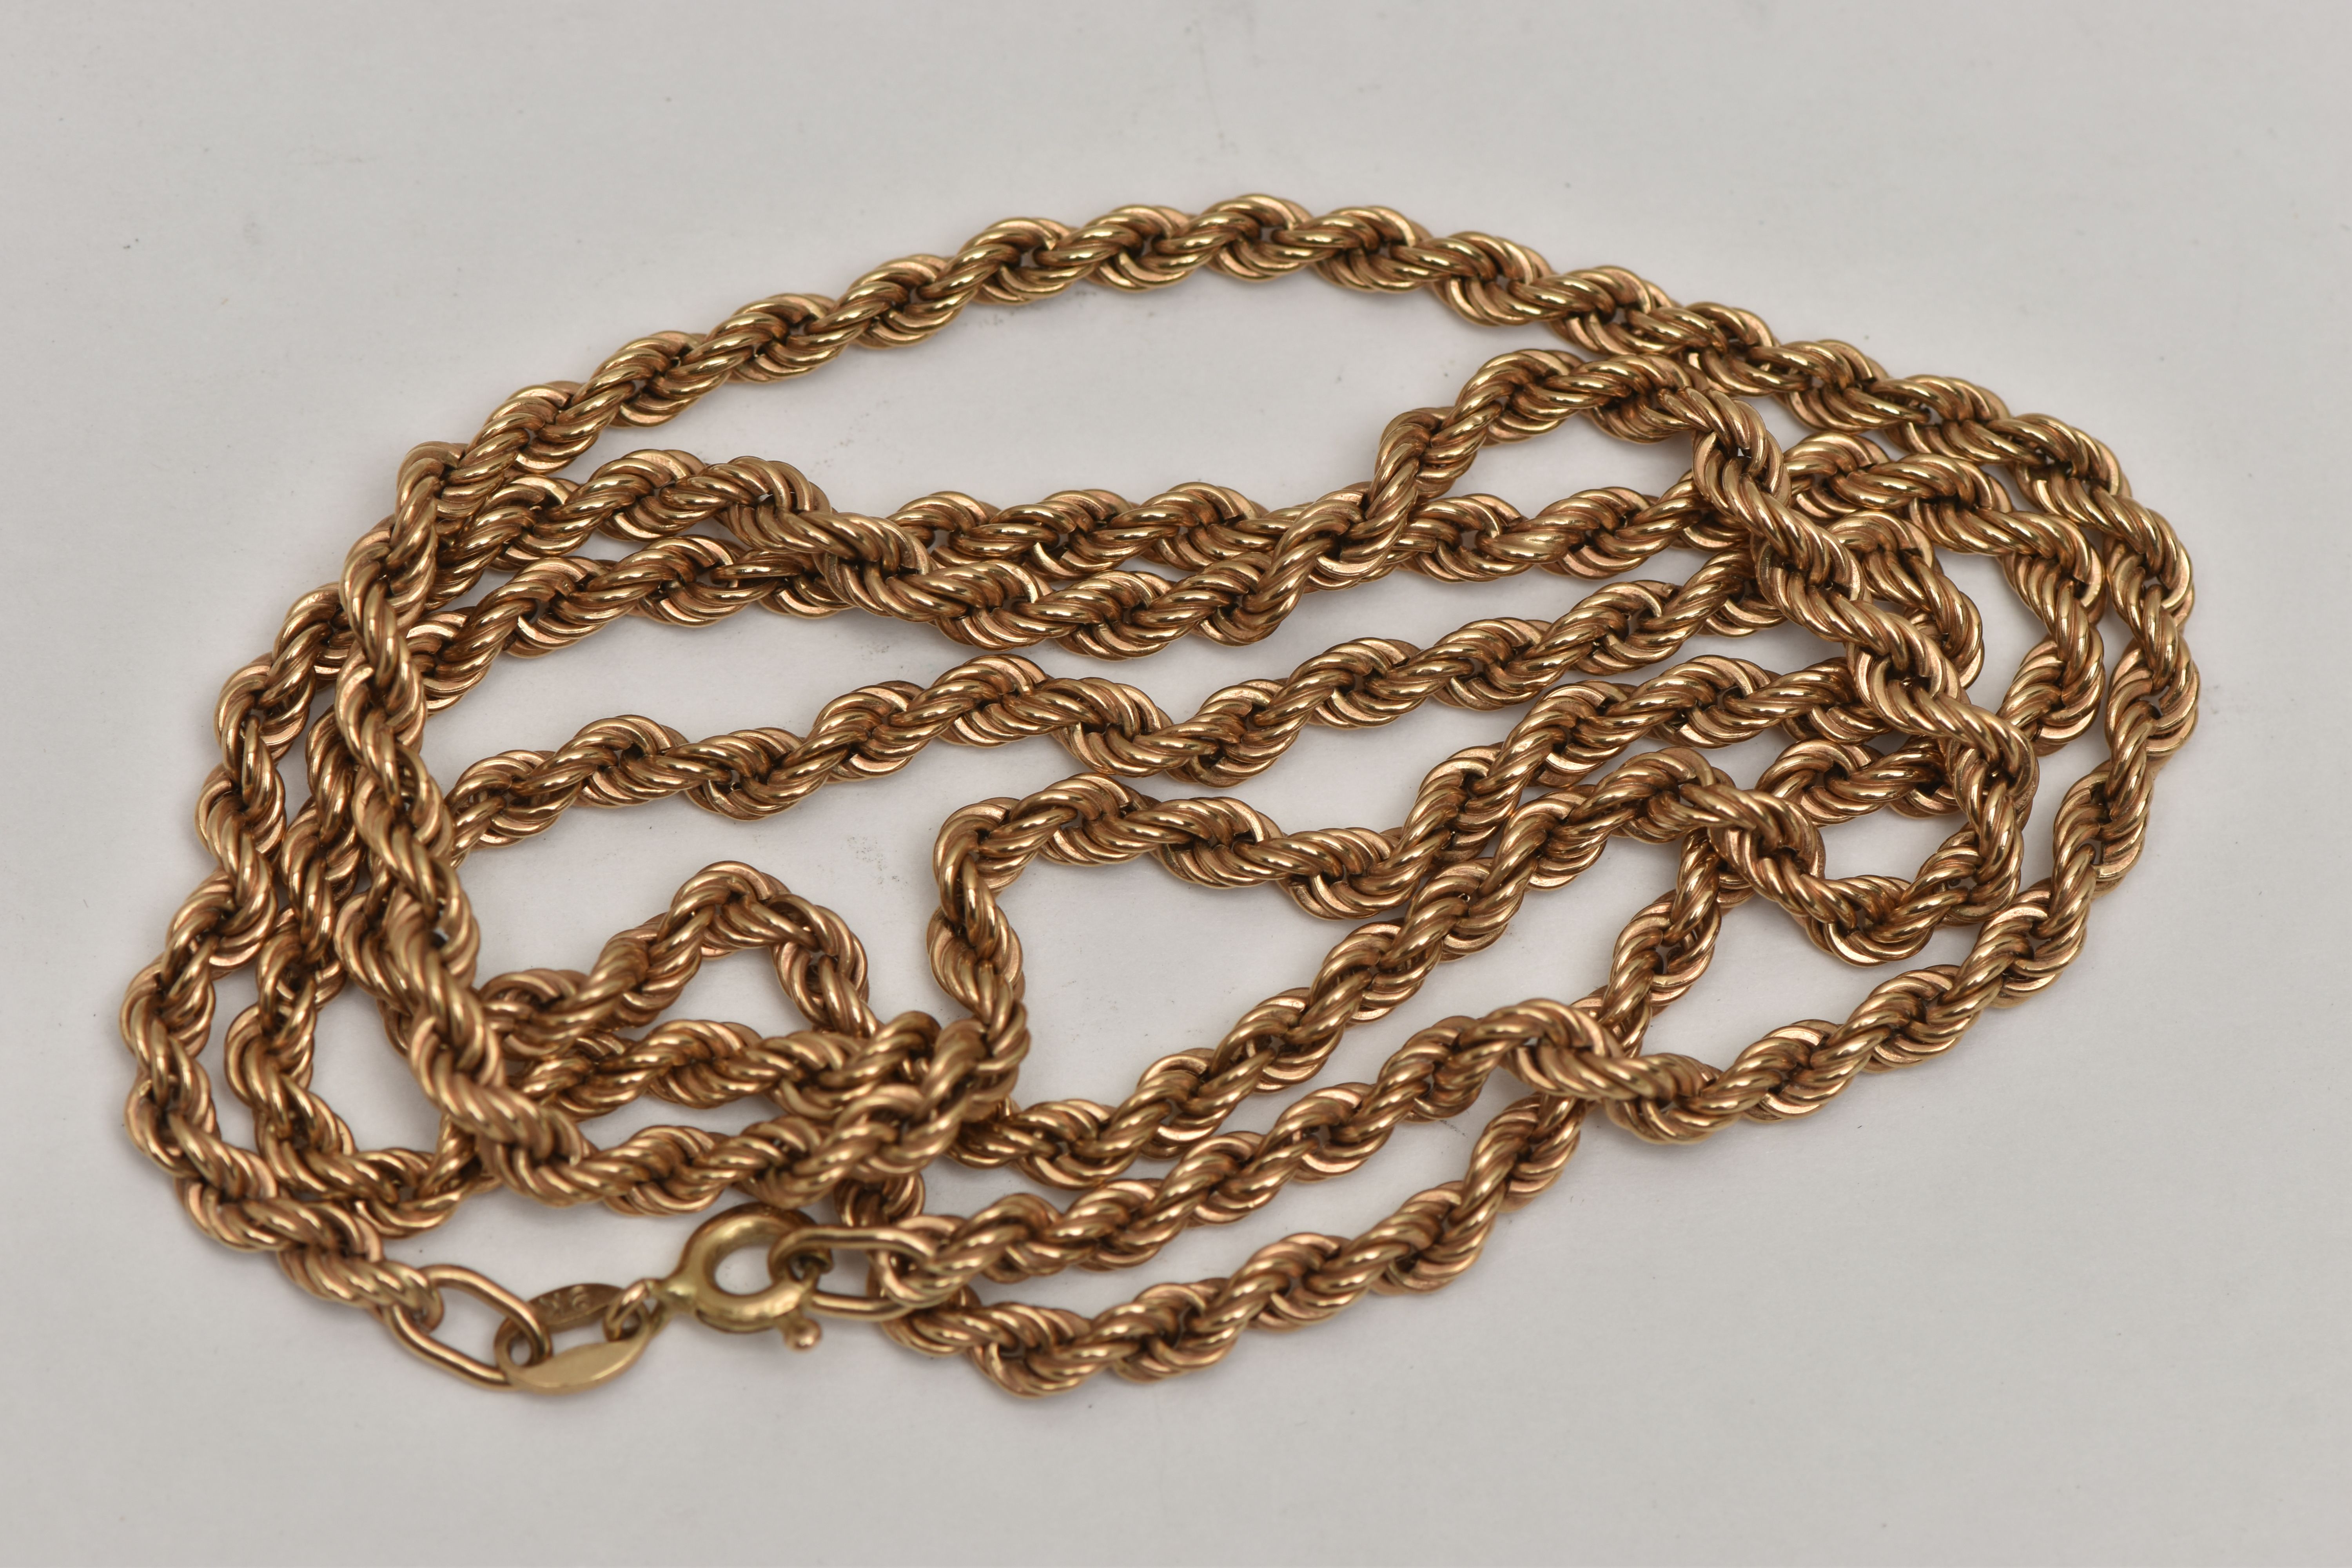 A 9CT GOLD ROPE TWIST CHAIN, fitted with a spring clasp, hallmarked 9ct London import, length 640mm,